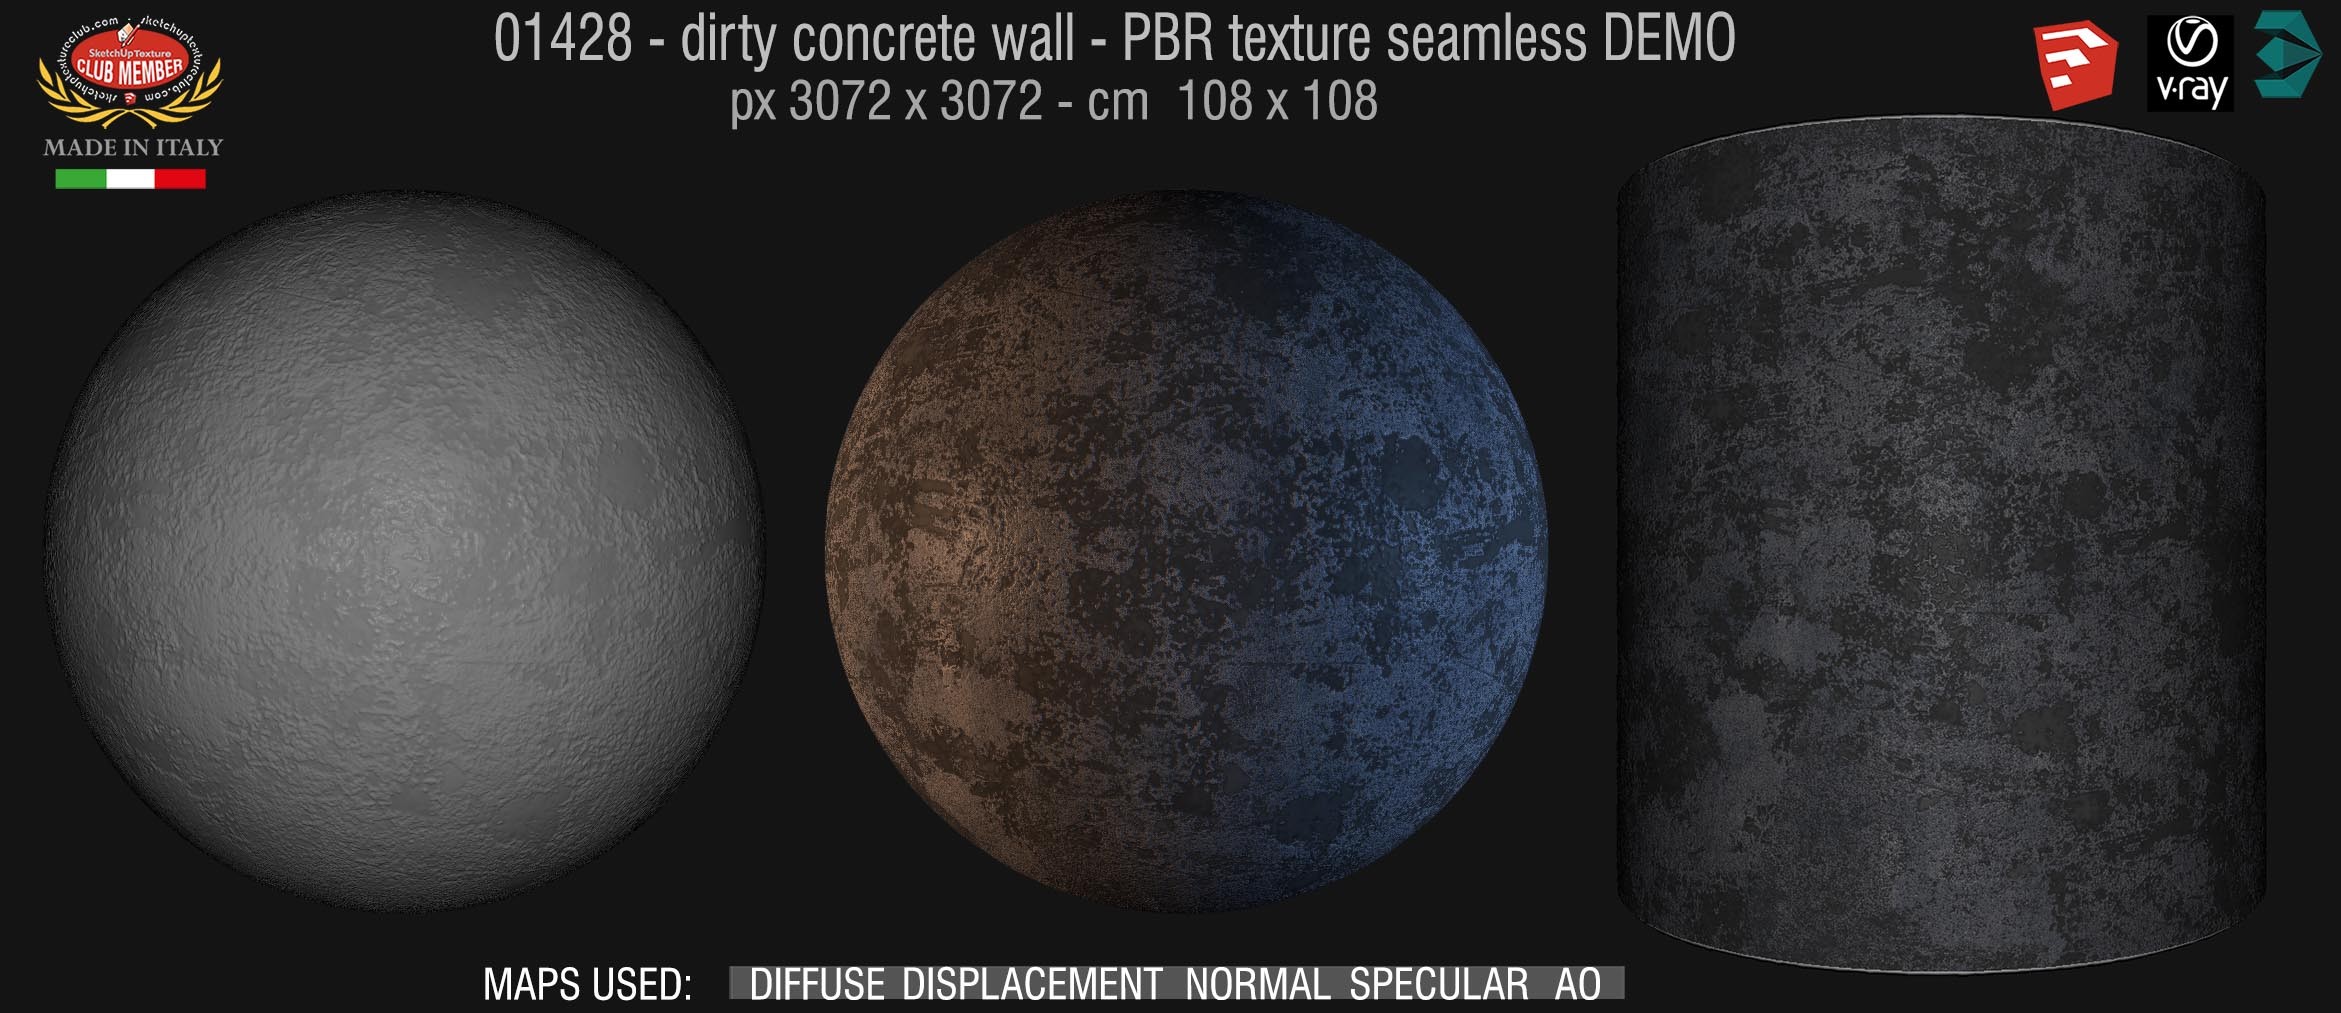 01428  Concrete bare dirty wall PBR texture seamless DEMO